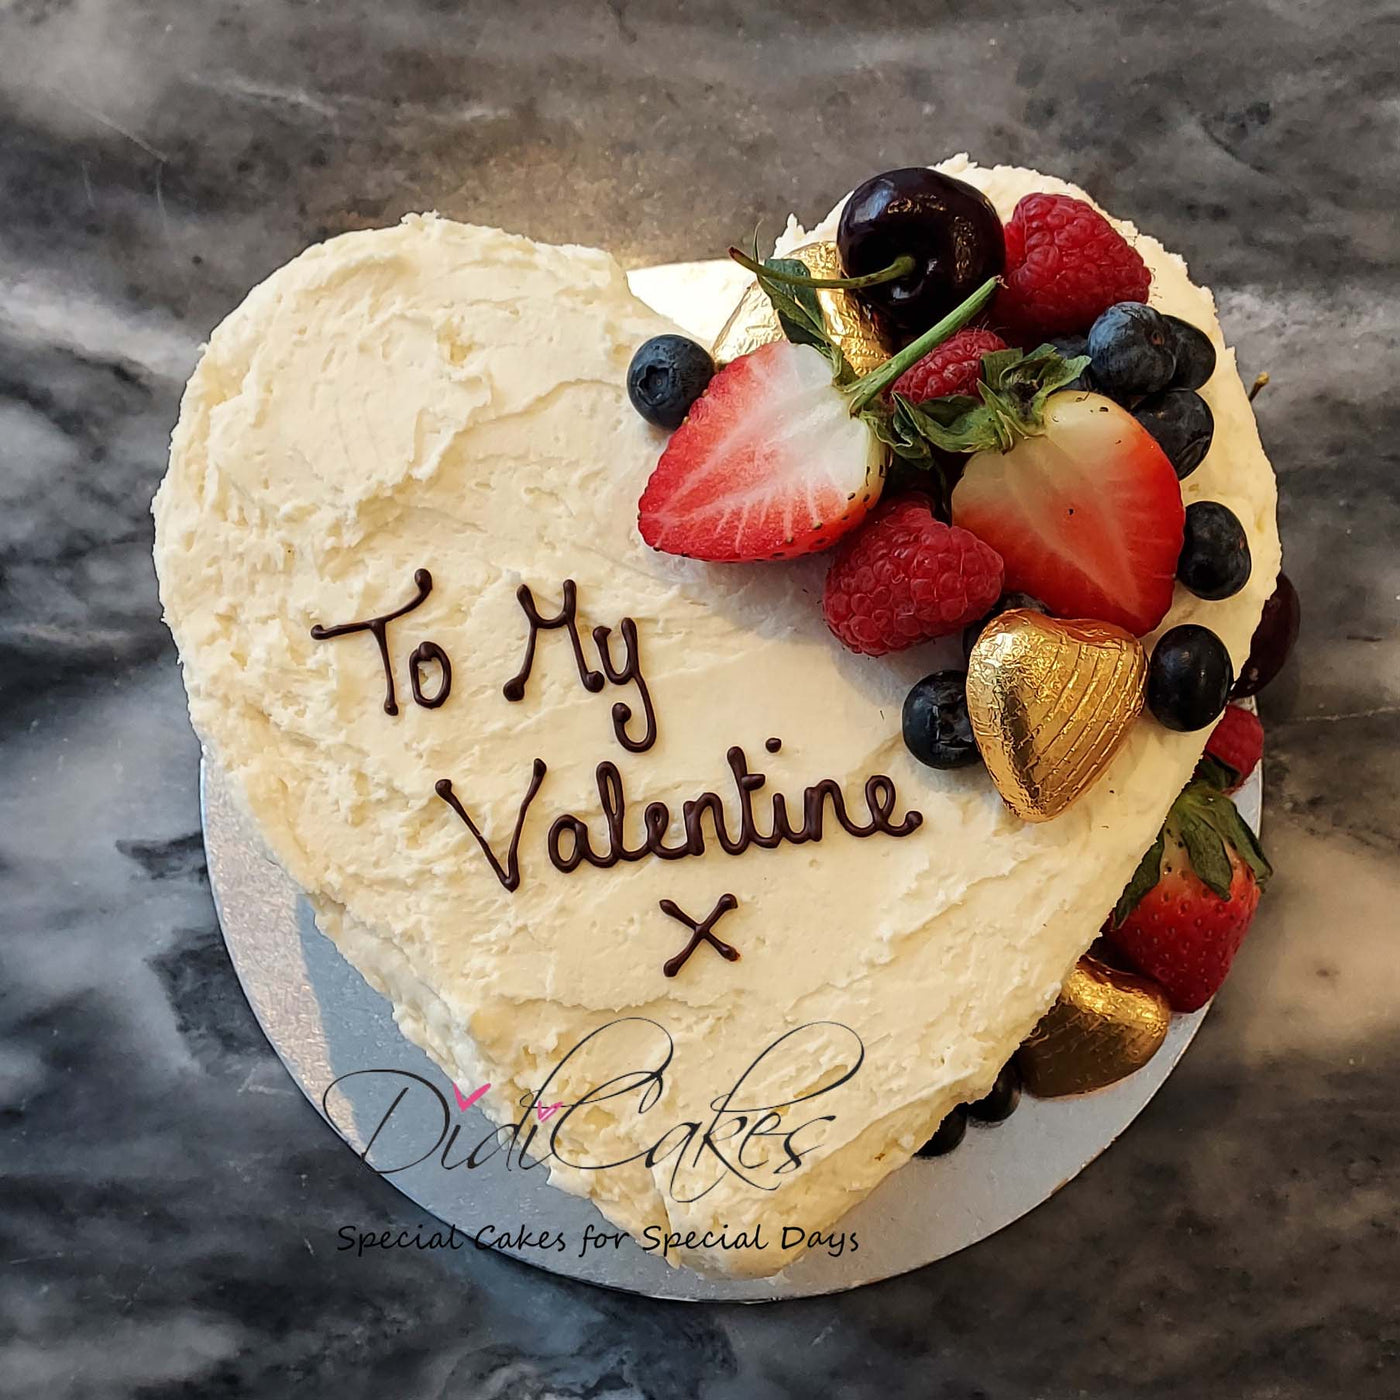 Valentines Heart Cake with Fruits